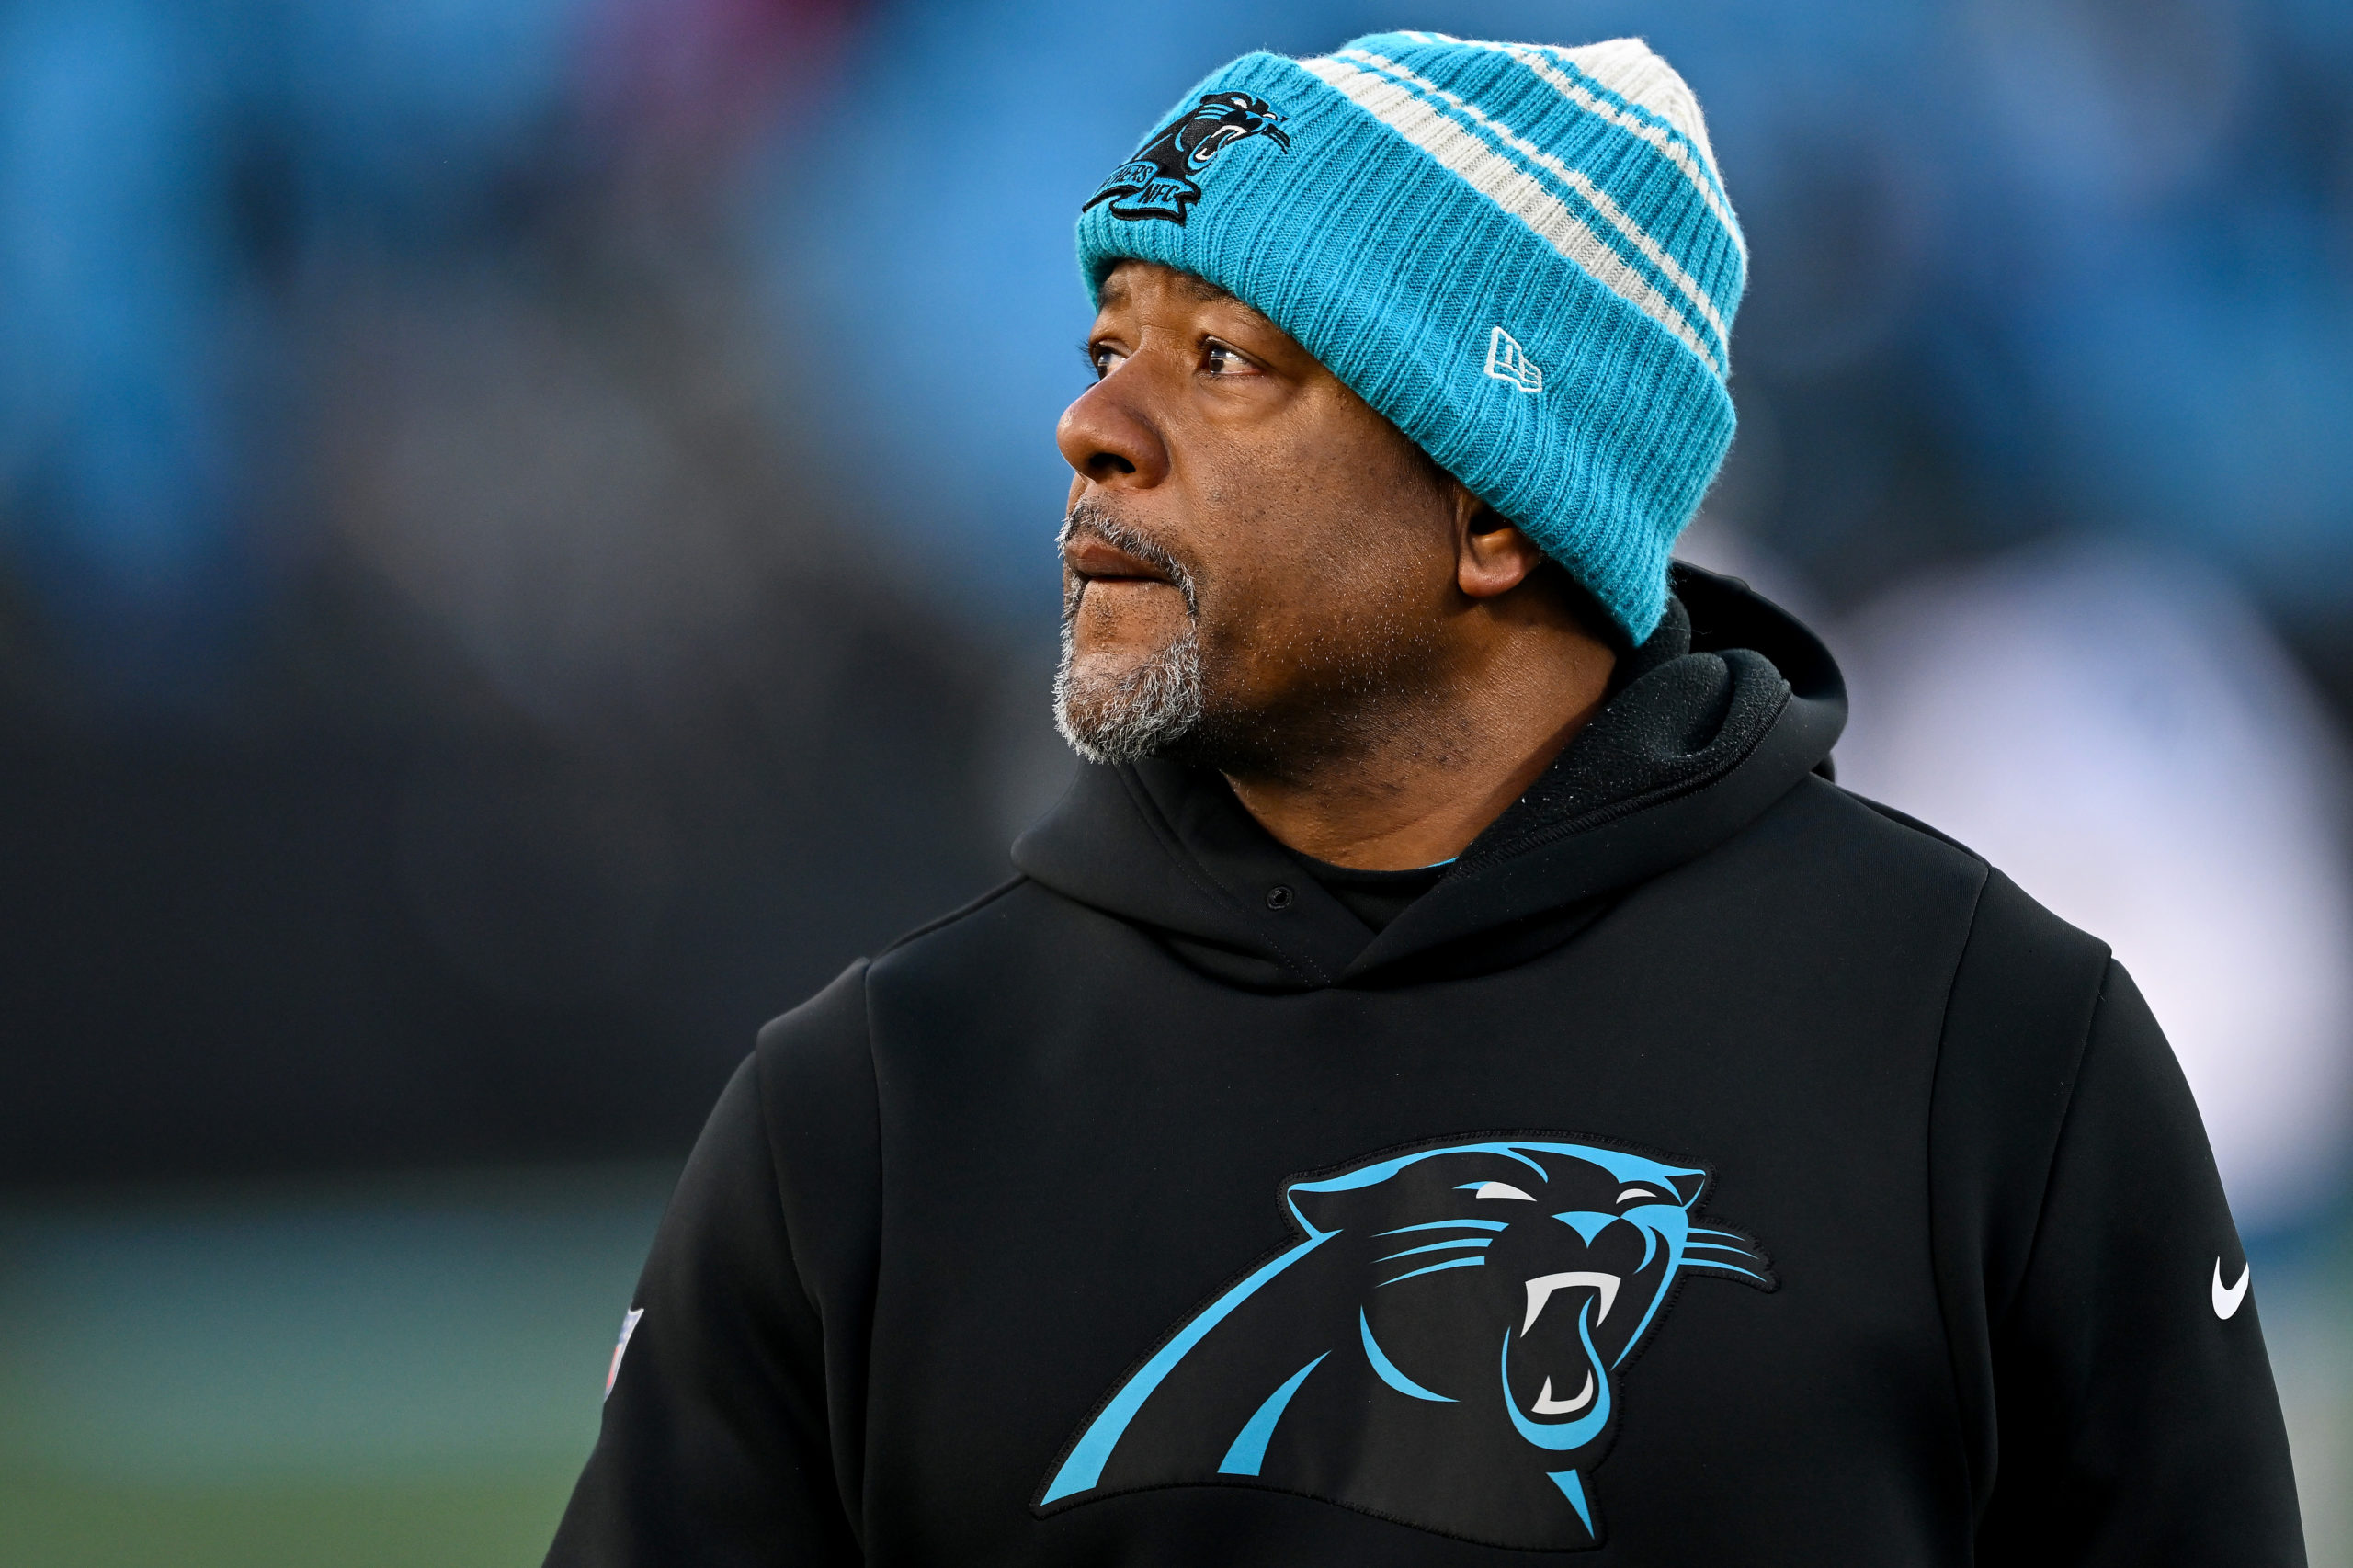 CHARLOTTE, NORTH CAROLINA - DECEMBER 24: Interim head coach Steve Wilks of the Carolina Panthers exits the field after the game against the Detroit Lions at Bank of America Stadium on December 24, 2022 in Charlotte, North Carolina. Grant Halverson/Getty Images